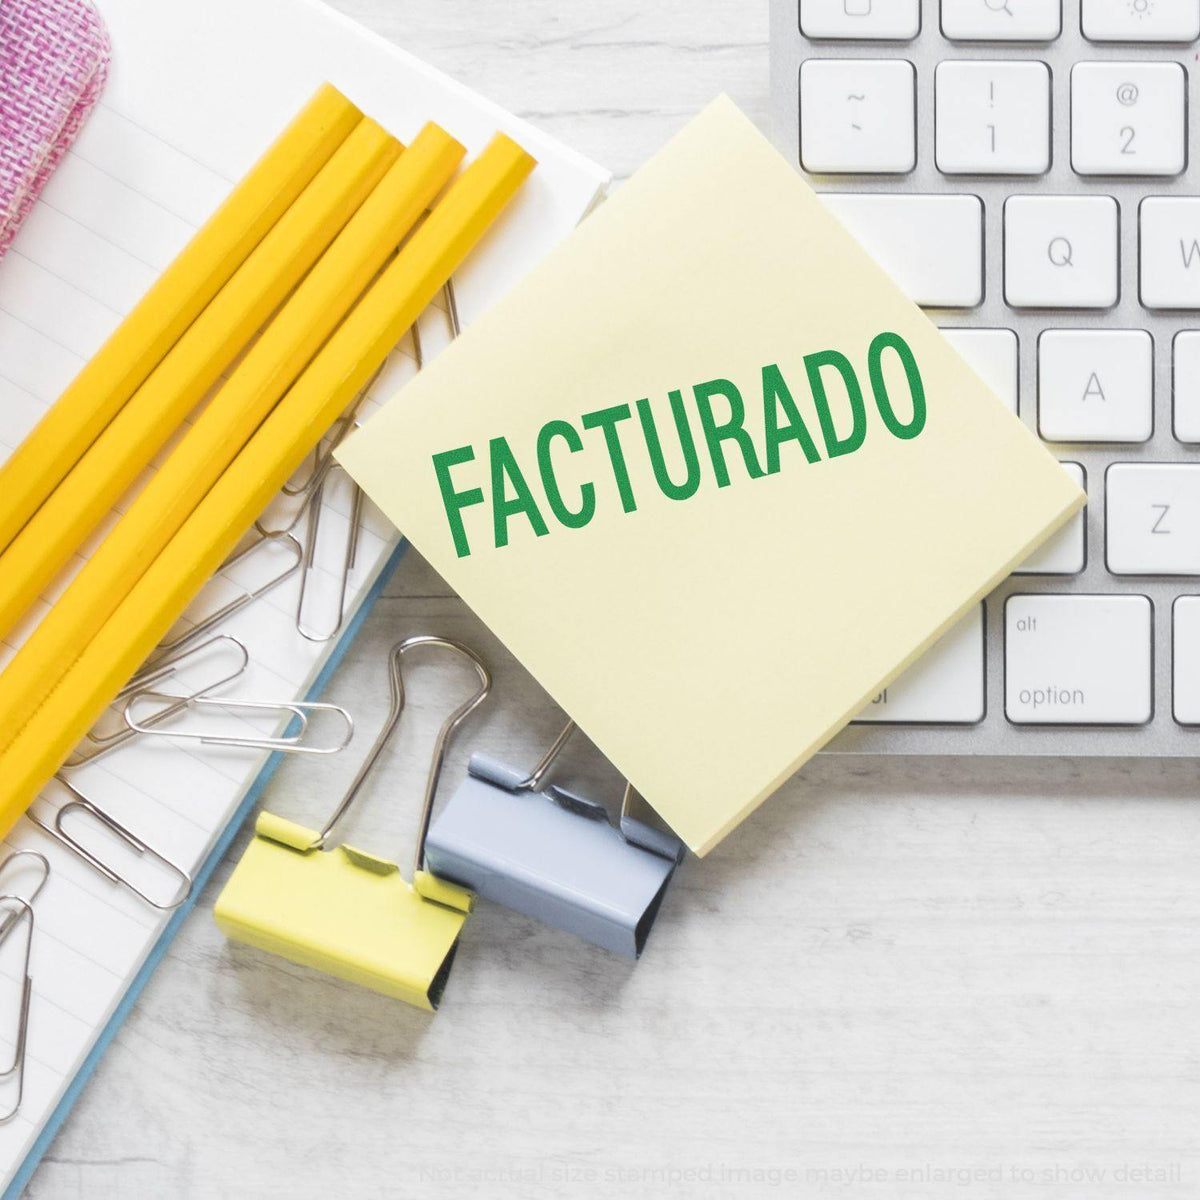 In Use Facturado Rubber Stamp Image